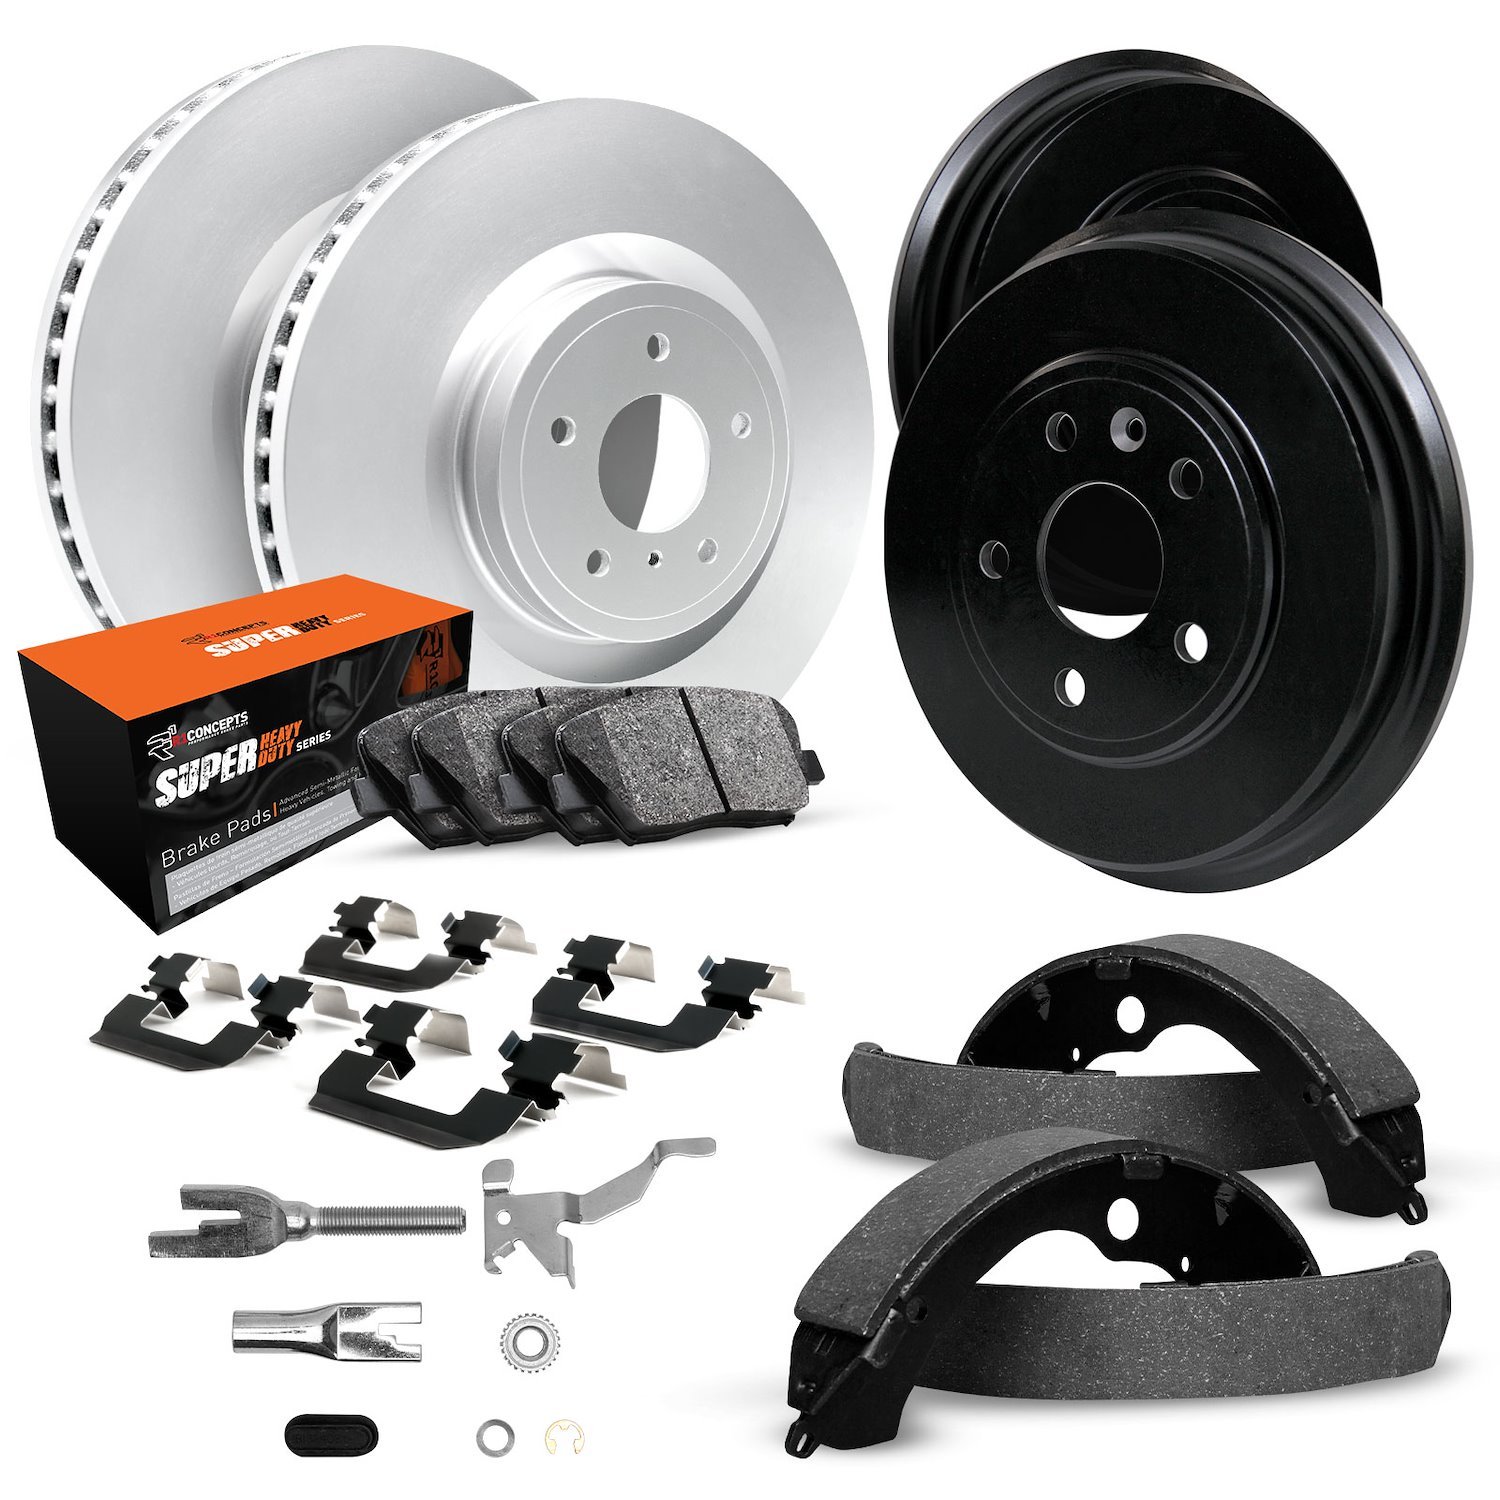 GEO-Carbon Brake Rotor & Drum Set w/Super-Duty Pads, Shoes, Hardware/Adjusters, 1992-2000 GM, Position: Front & Rear